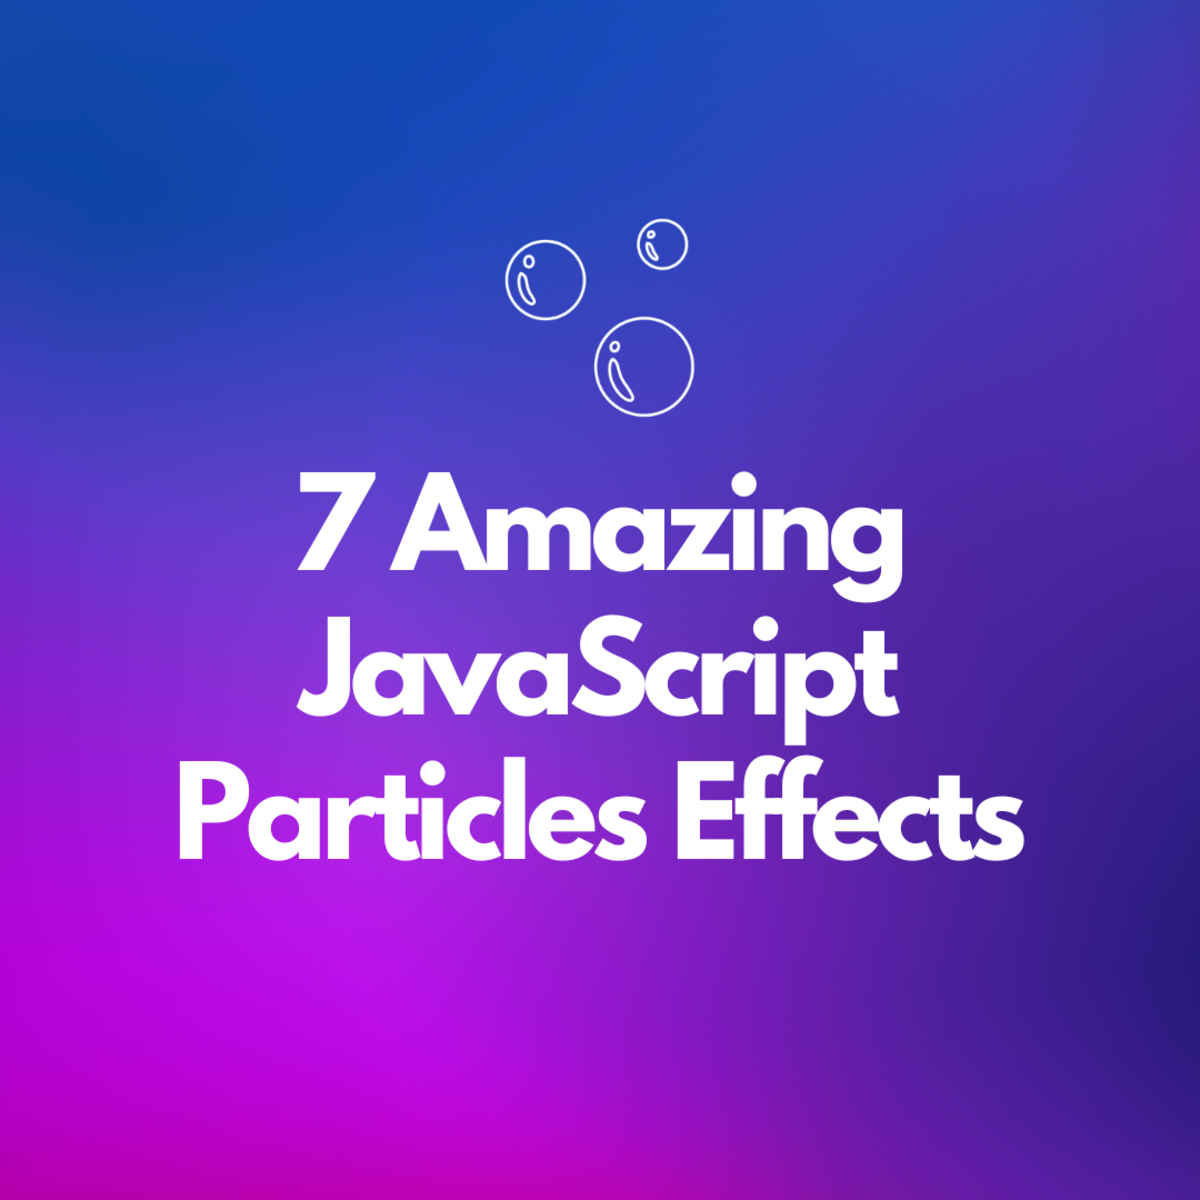 7 Amazing JavaScript Particles Effects to Check Out: The Ultimate List